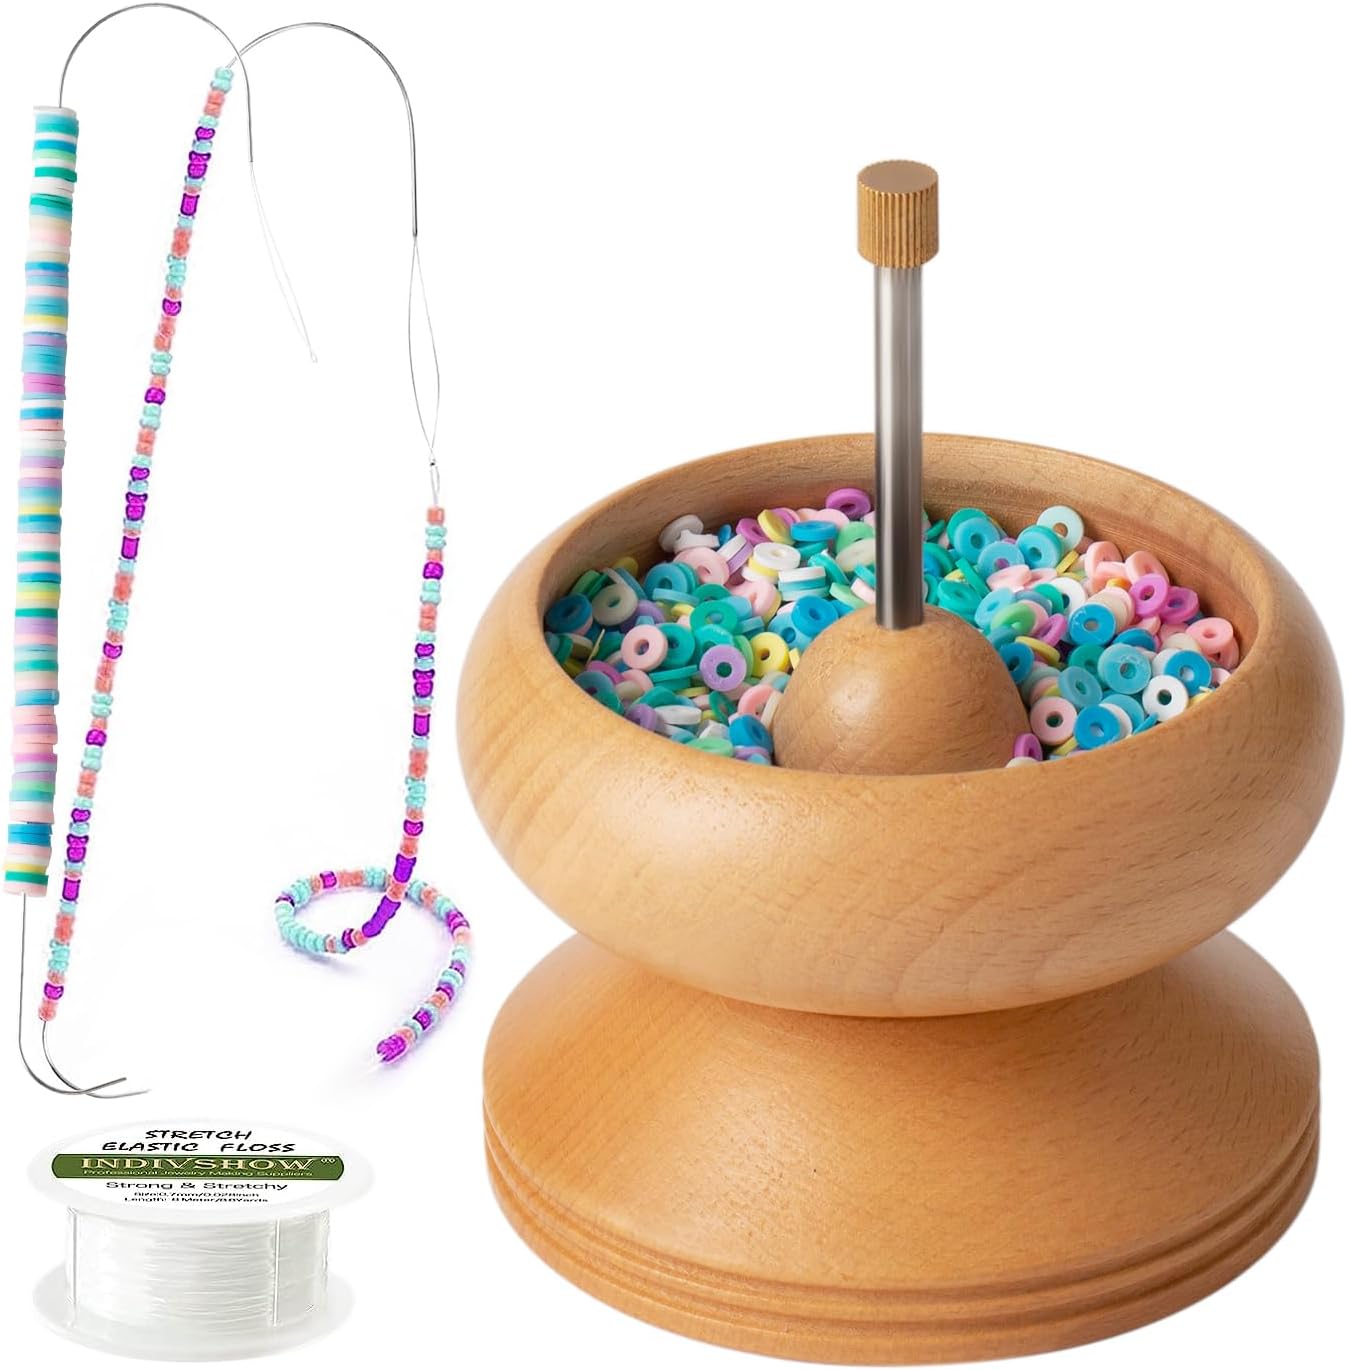 SPINNER FOR BEADS Automatic Beading Machine Bead Bowl Clay Bead Spinner DIY  Craf $26.39 - PicClick